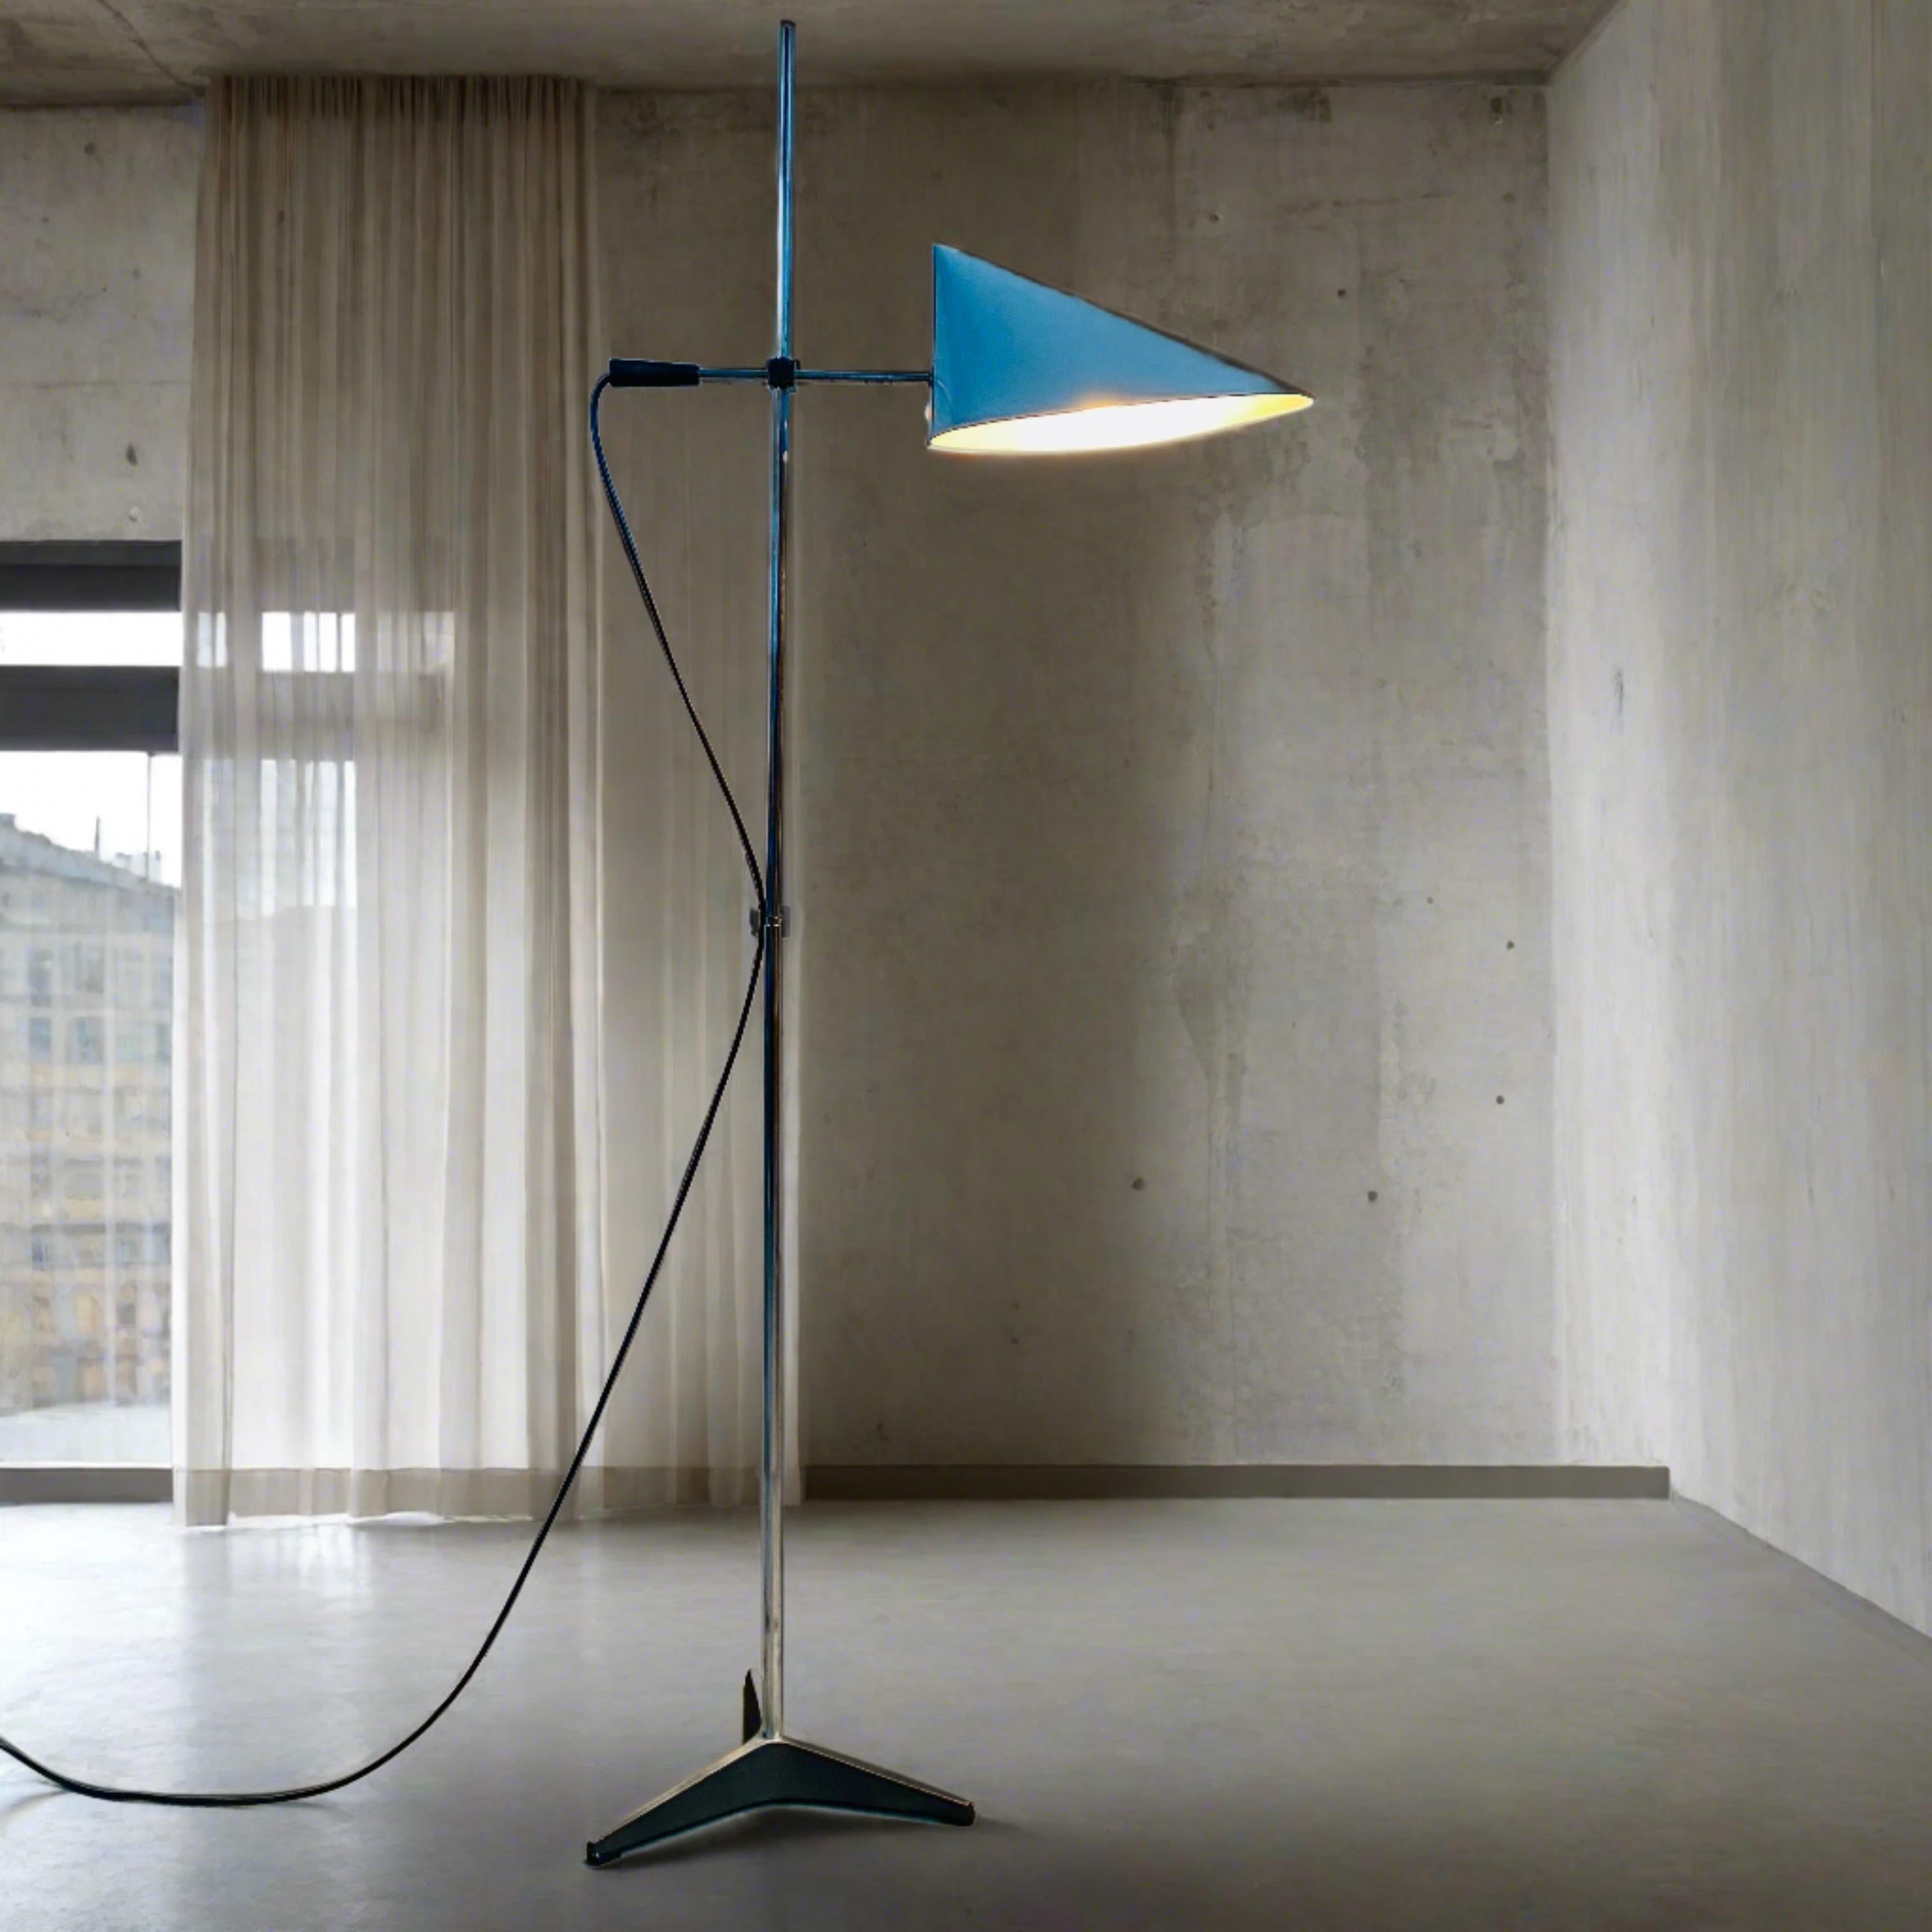 Illuminate Your Space with Vintage Elegance: Jan Jaspers' Mid-Century Floor Lamp for Raak Amsterdam

Description: Step into the timeless elegance of mid-century design with the Jan Jaspers for Raak Amsterdam Model D-2003 floor lamp. Crafted in Dutch